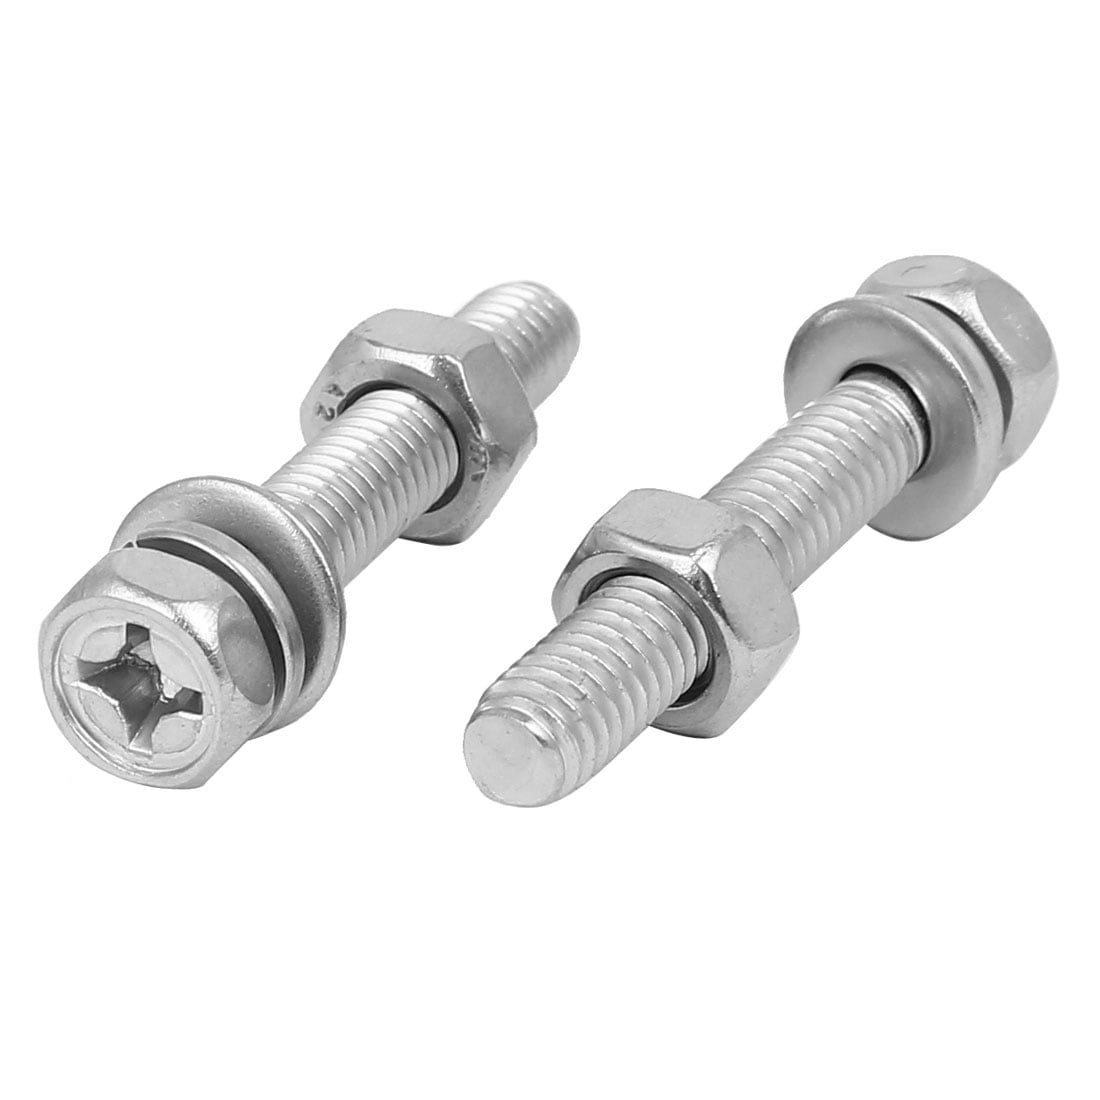 M6 x 10mm Nut Drop Down Box Options Bolt & Washer Set Stainless Steel 